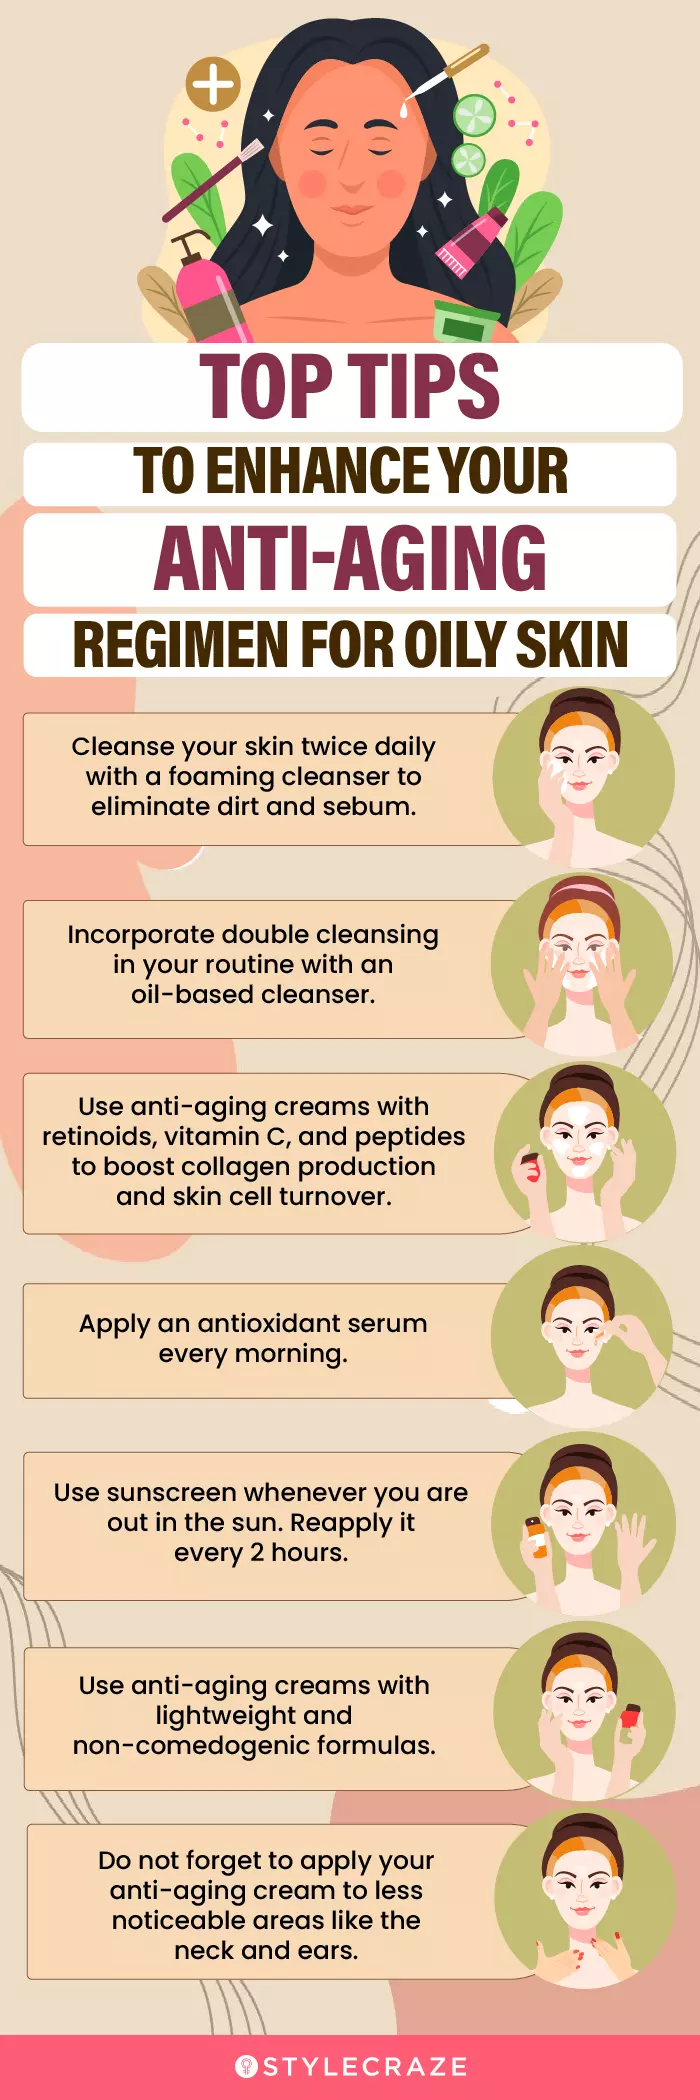 Top Tips To Enhance Your Anti-Aging Oily Skin Care Regimen (infographic)